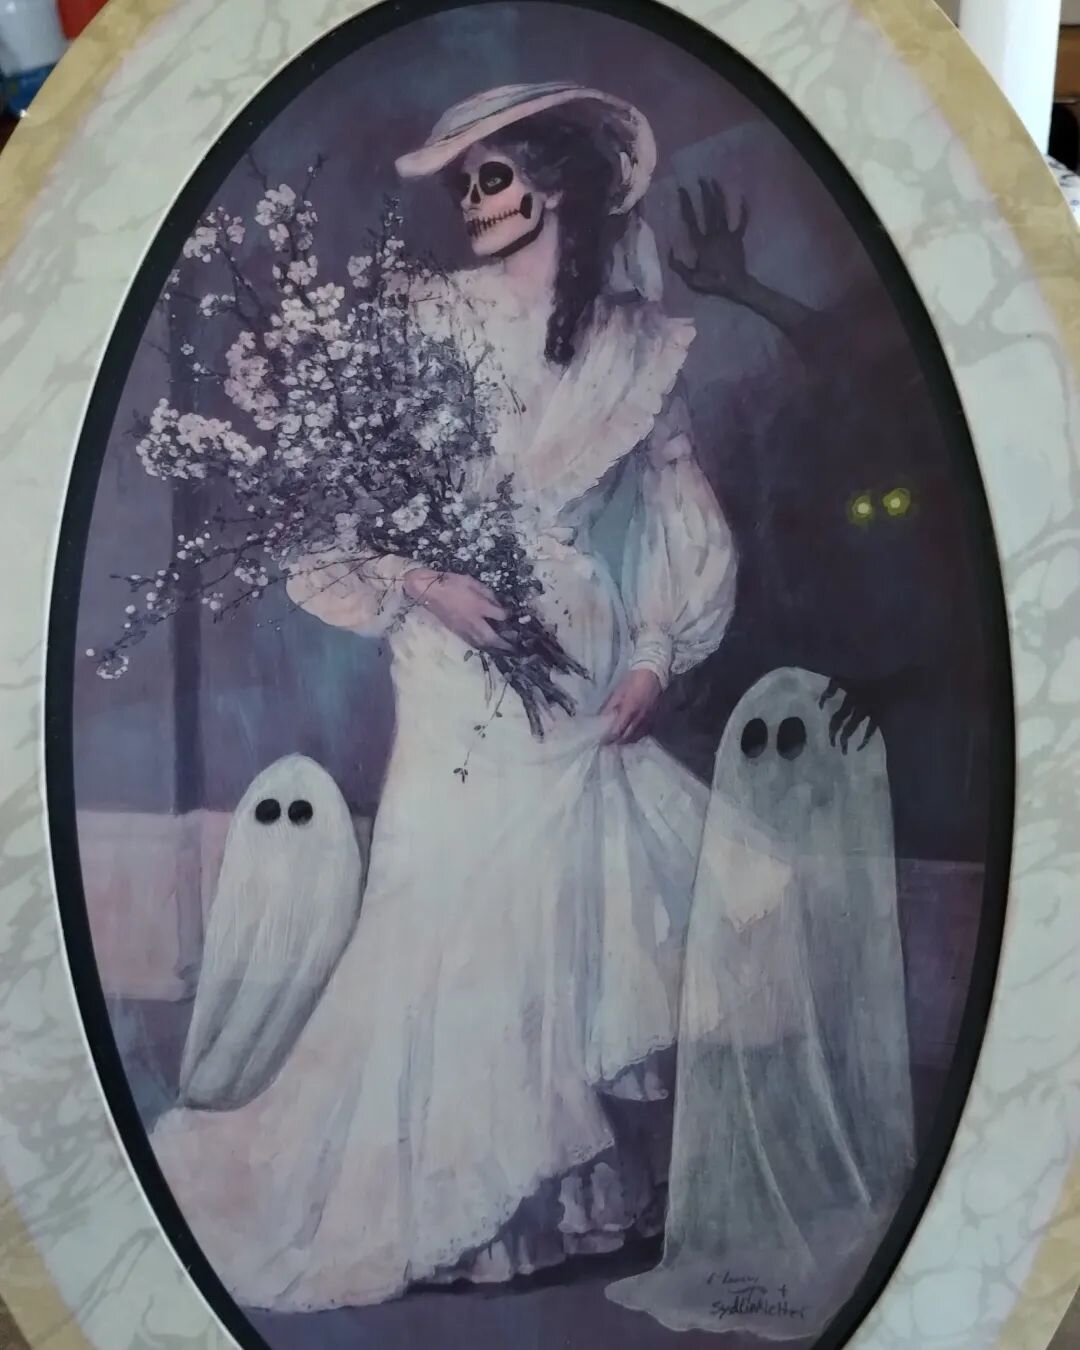 My painting entry for the Ghostly Gallery of the Haunted Tea Party event hosted by @glitteralchemyabq !

See their page for more details!
.
.
.
.
.
.
#ghost #painting #thriftpainting #ghostpainting #ghosttrend #halloween #victorian #acrylicpainting #